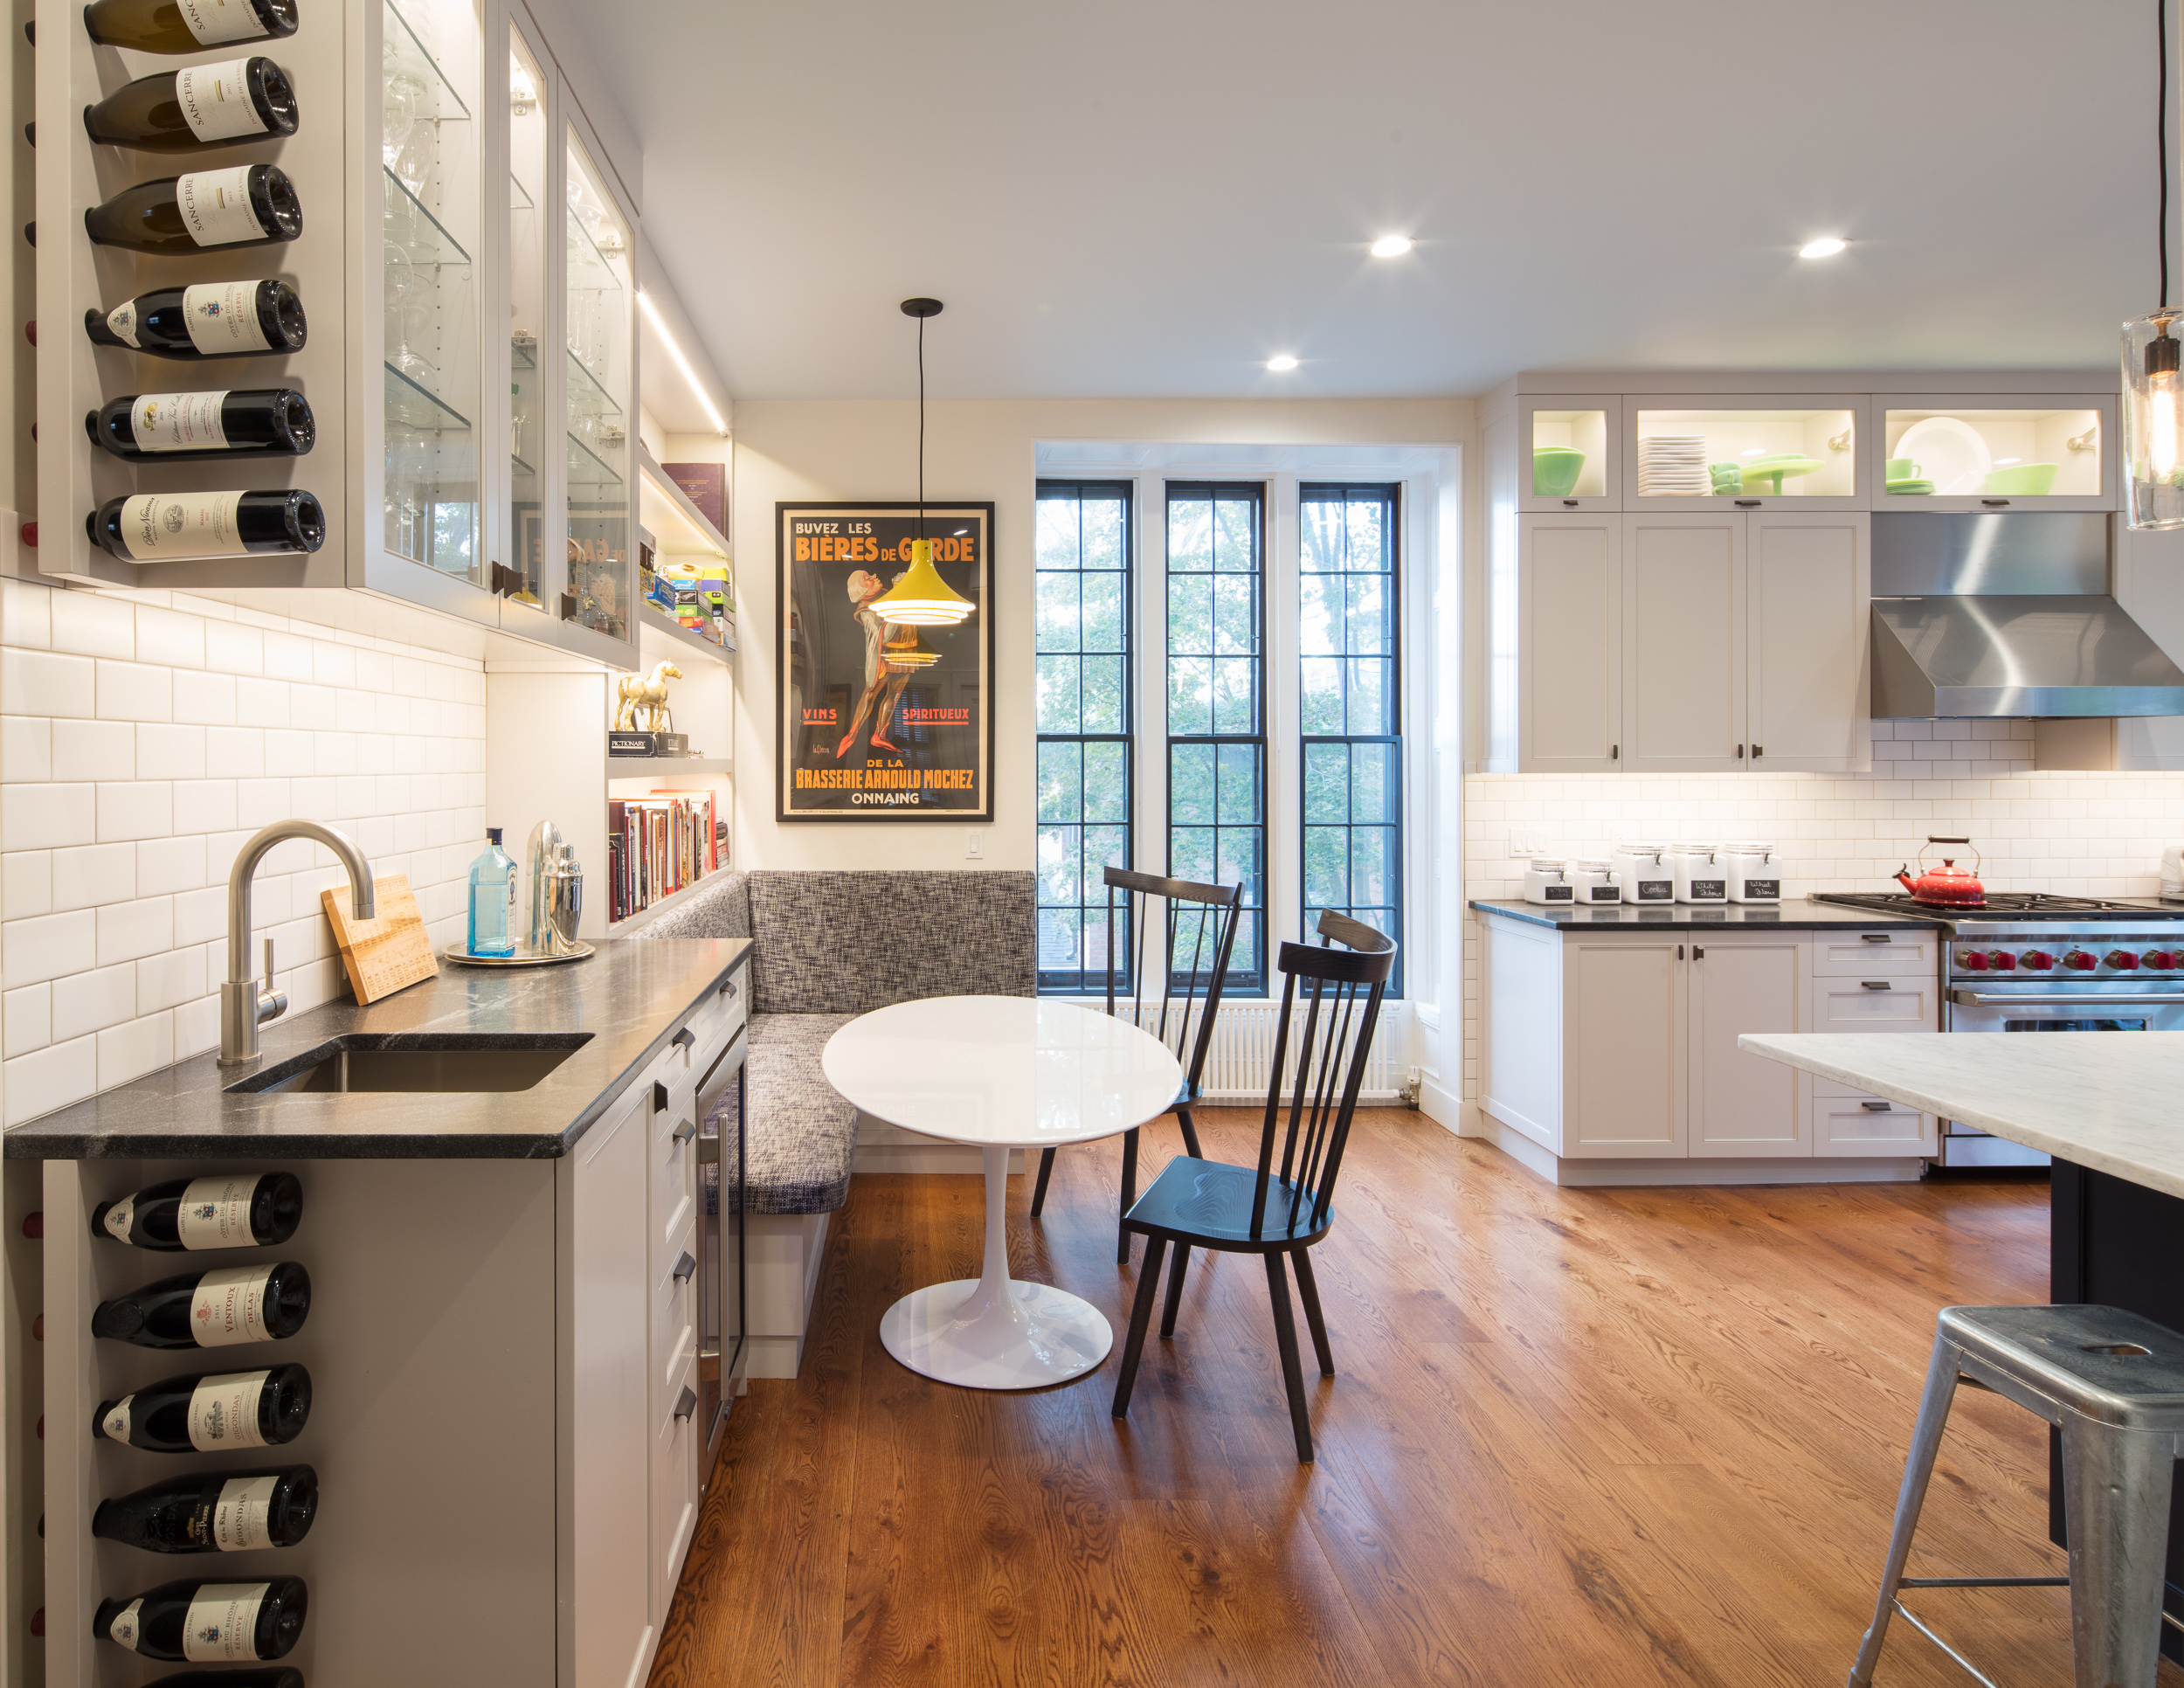  Custom cabinetry, original floor-to-bay window; a blend of new and old. 